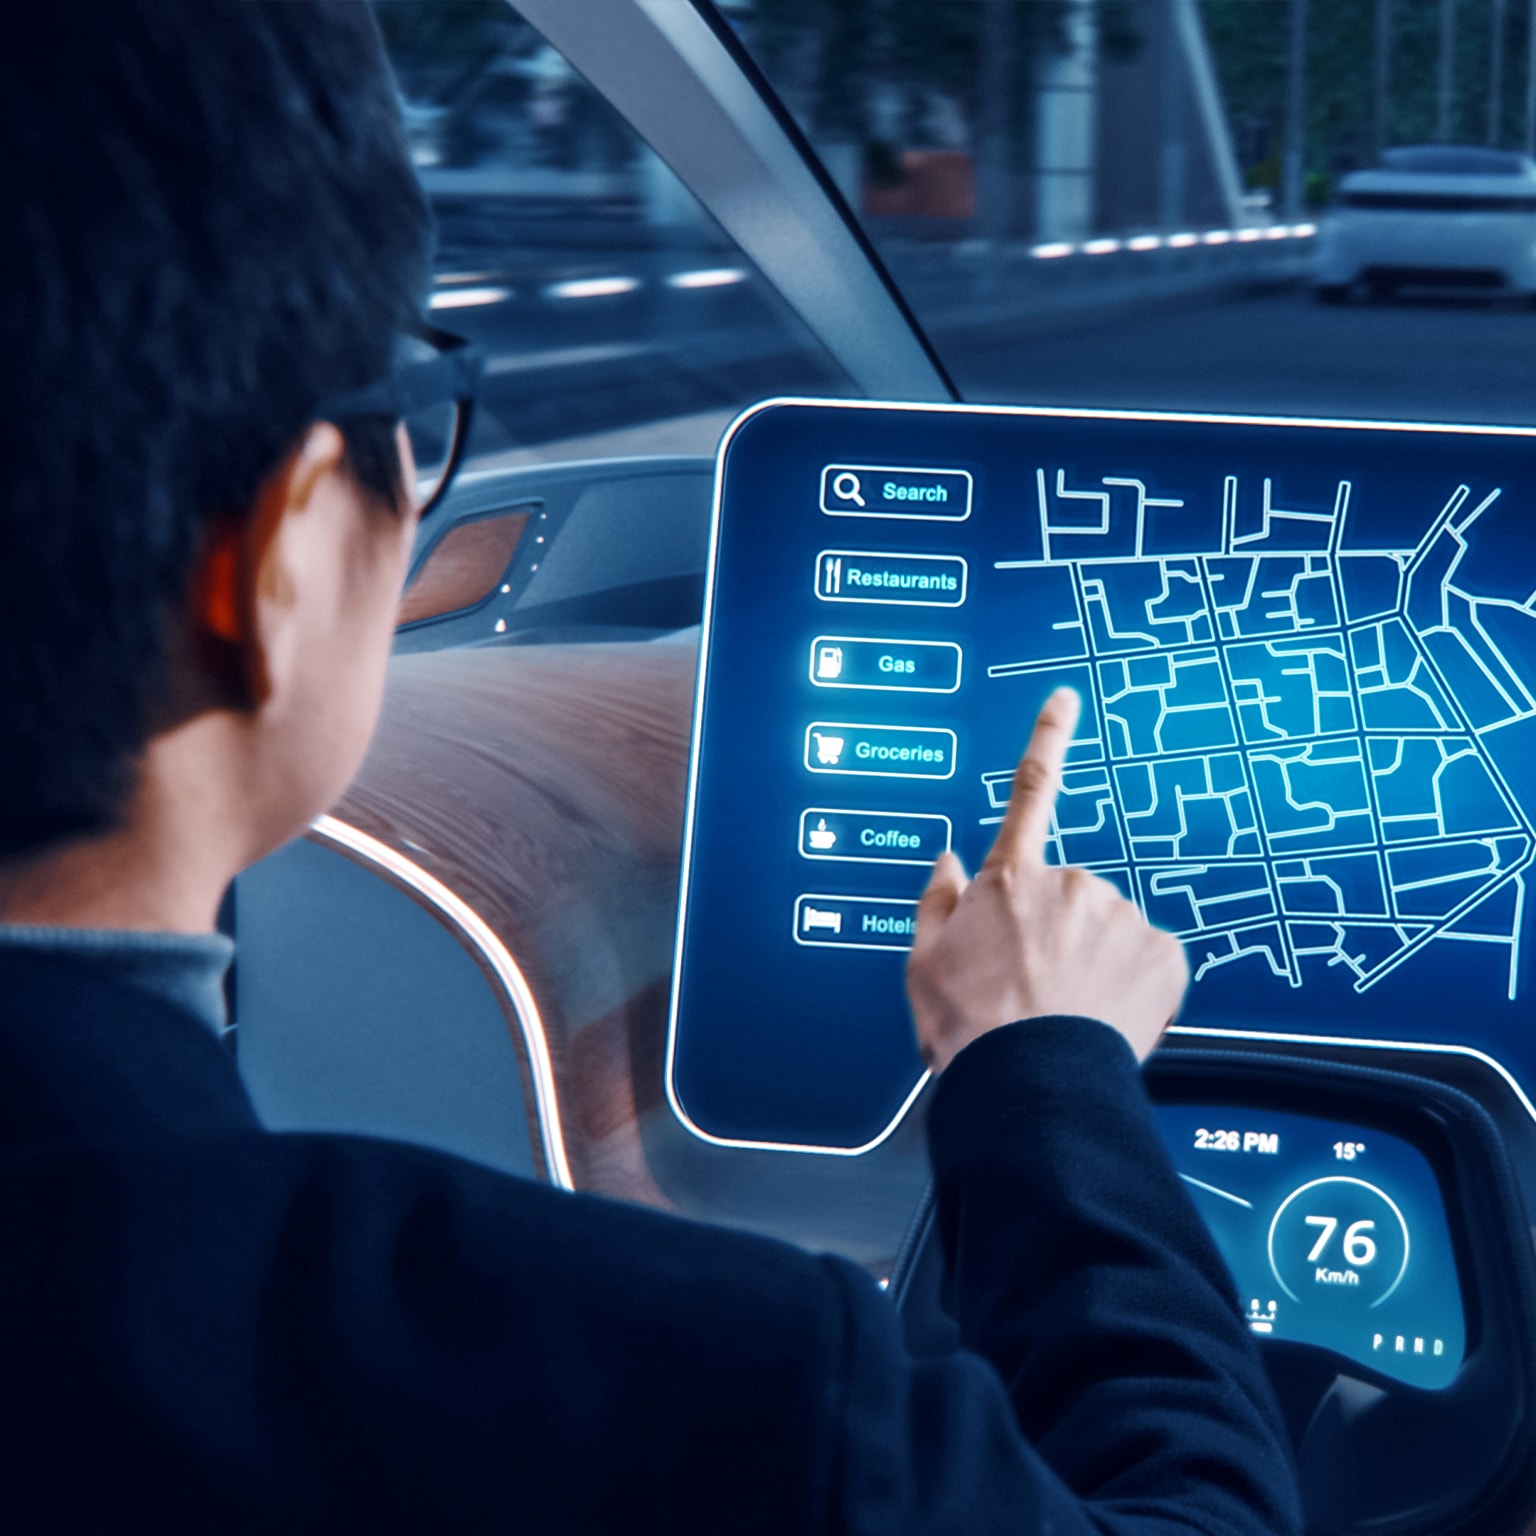 Software and electronics in the automotive industry: mapping a